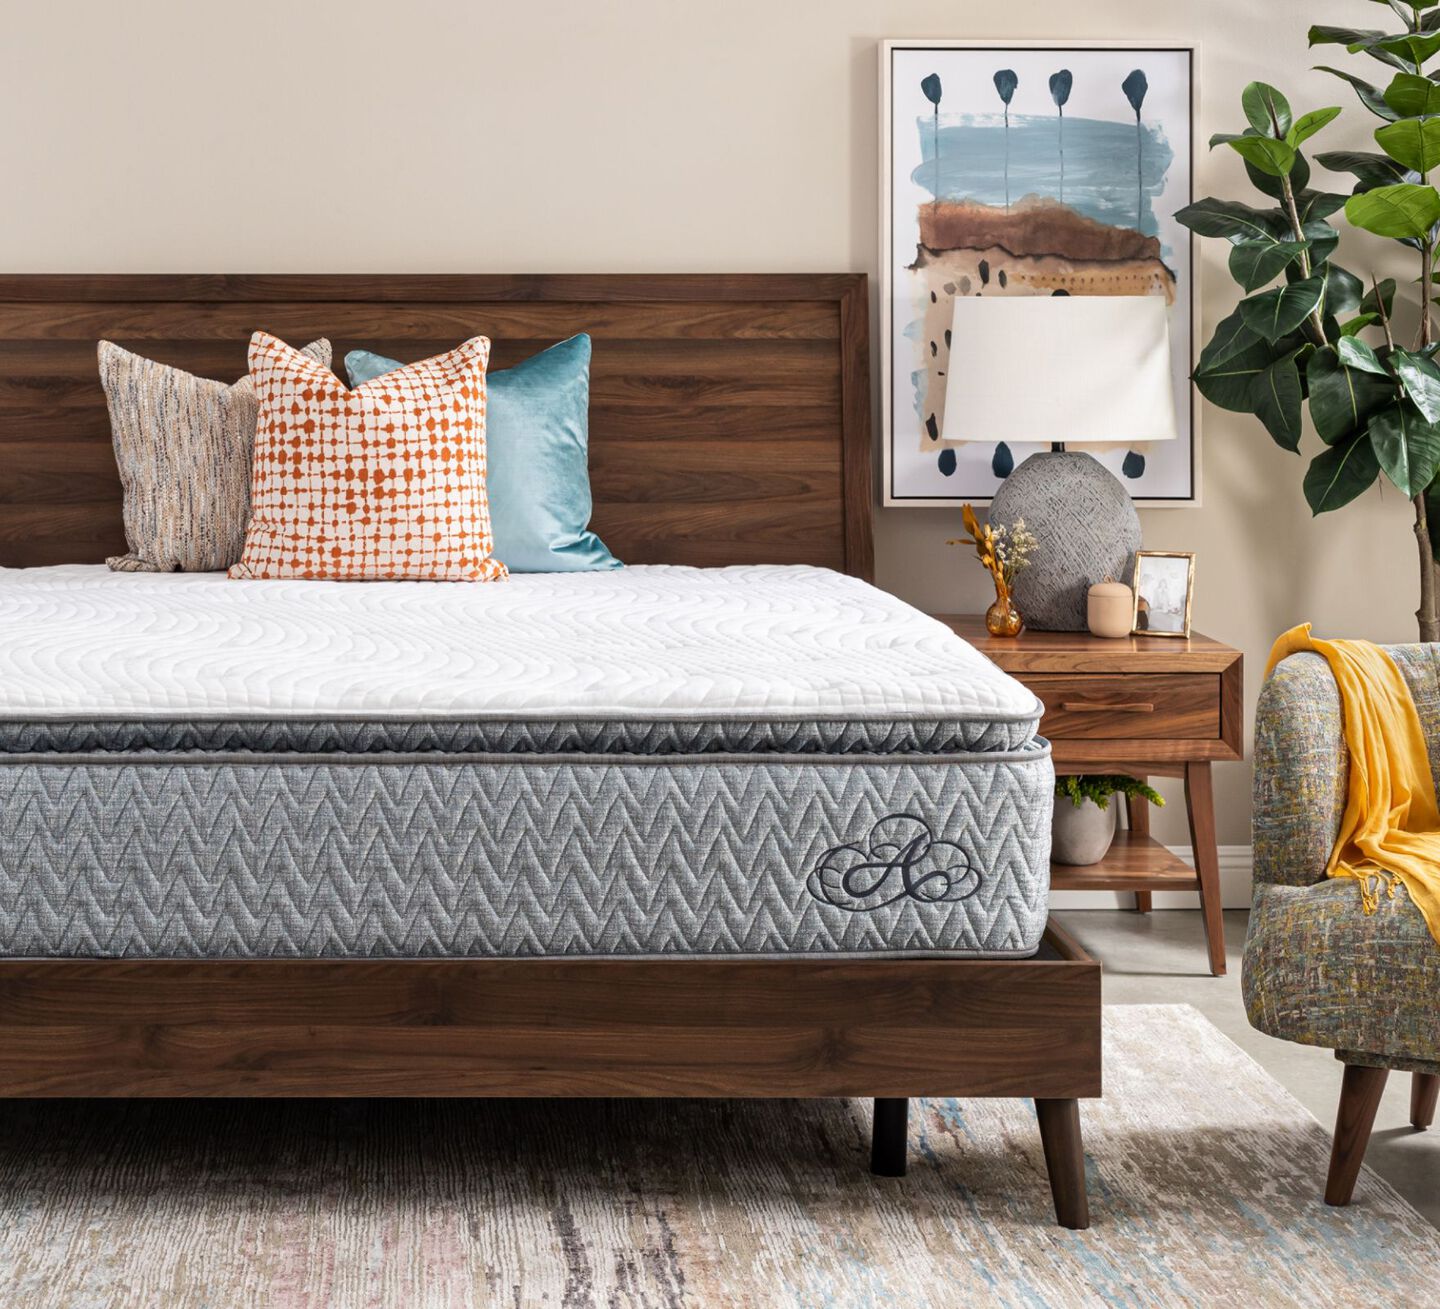 Americana mattress on a wooden bedframe with three pillows on top